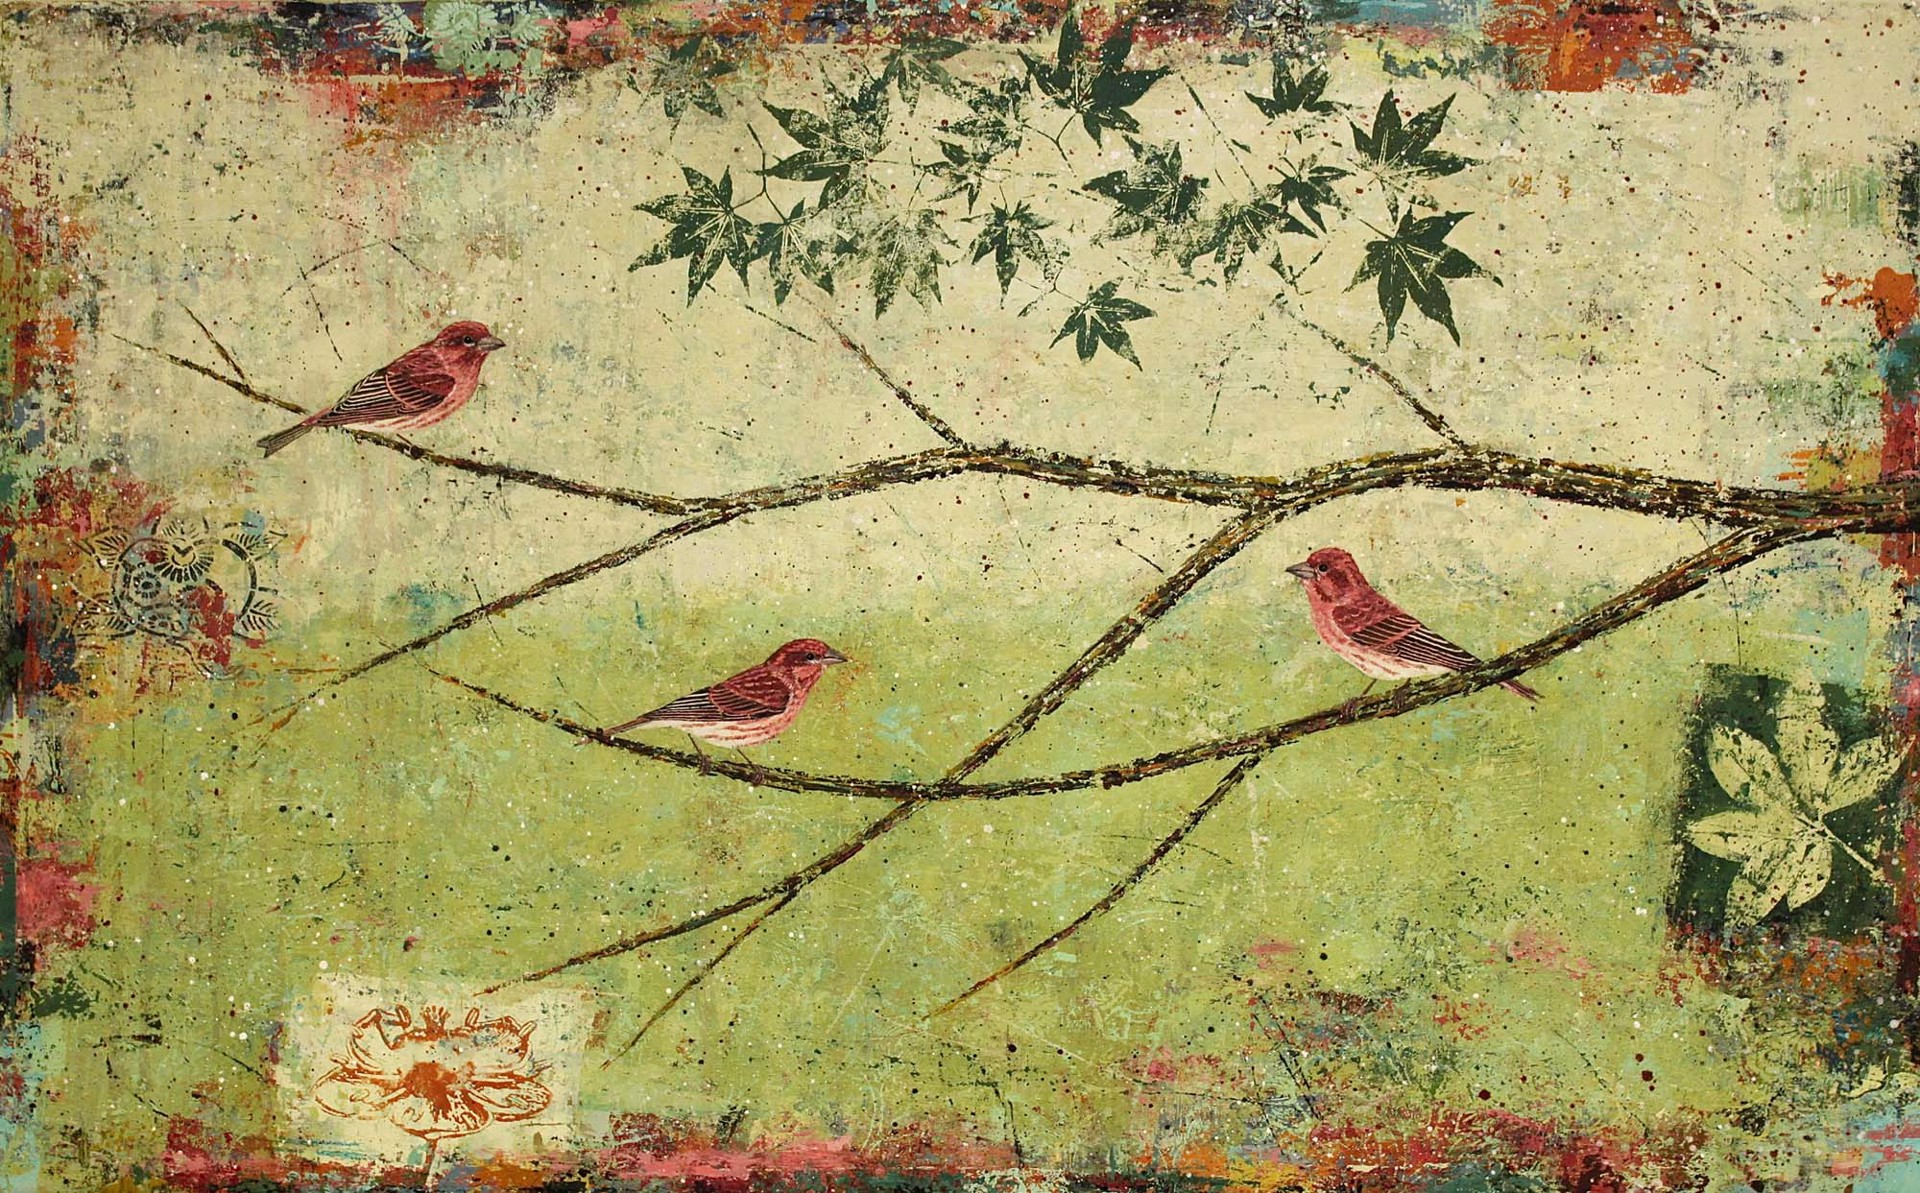 Purple Finches #7 by Paul Brigham